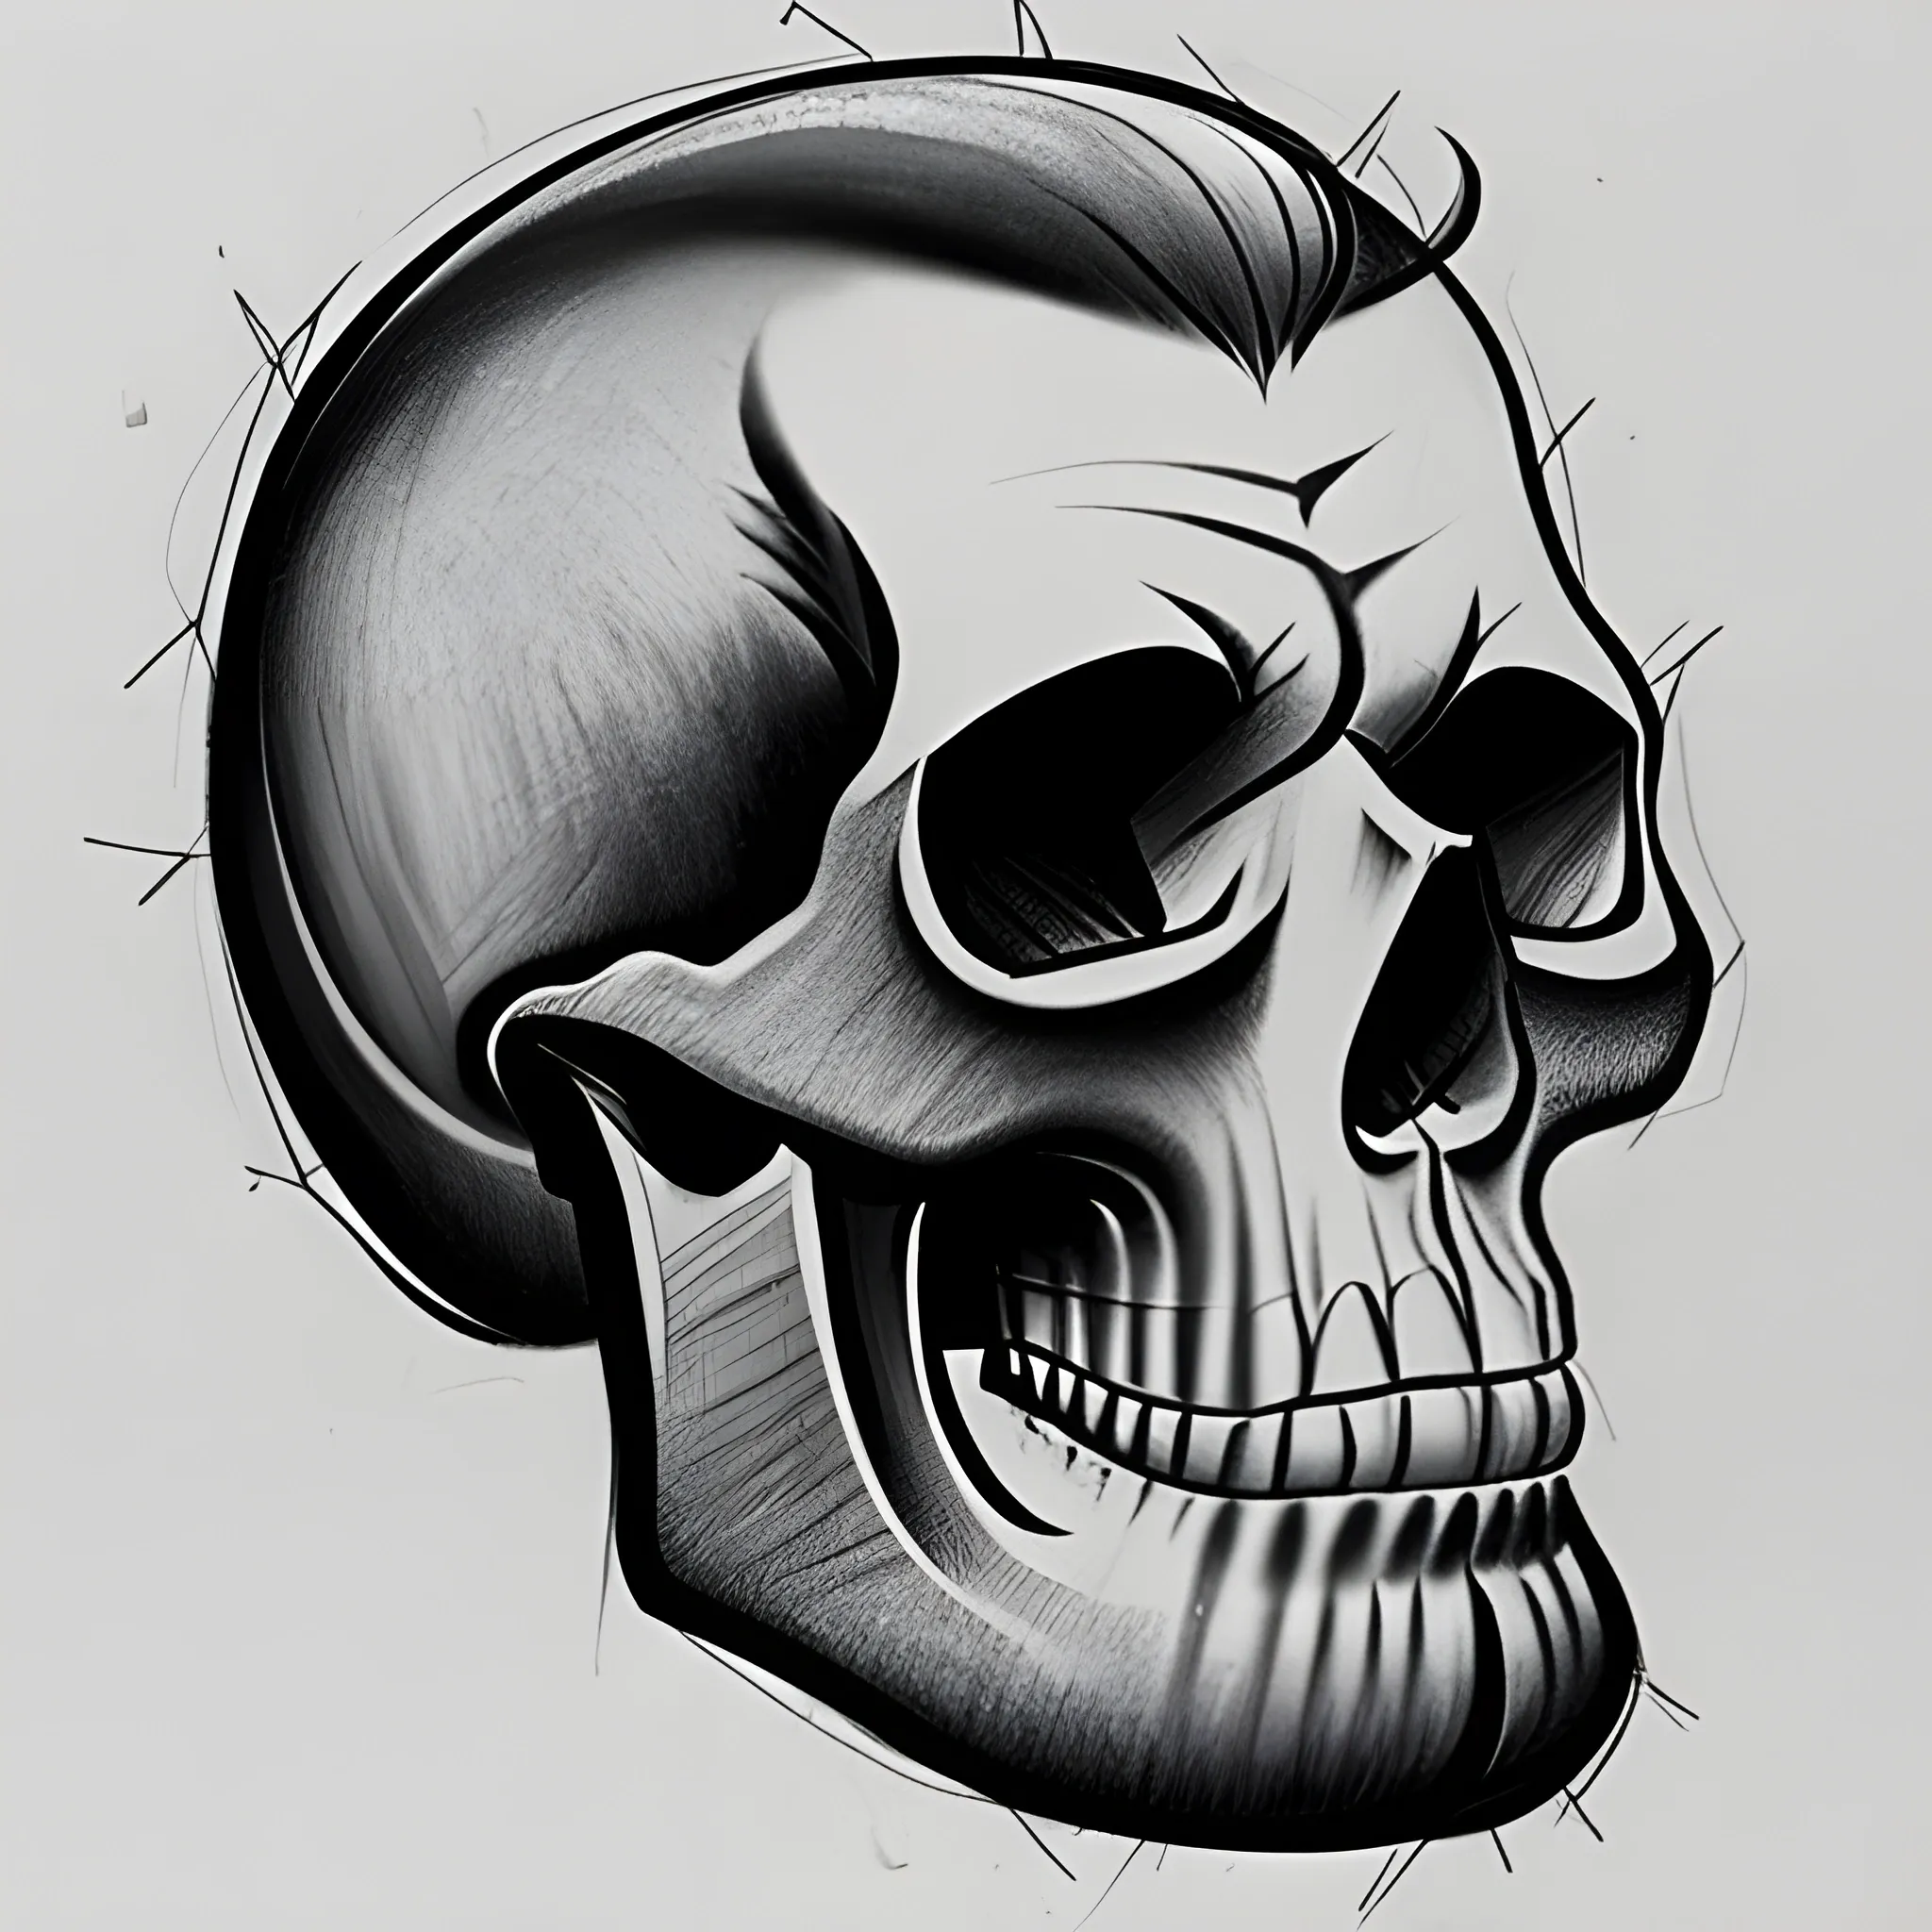 Skull tattoo Black and White Stock Photos & Images - Alamy